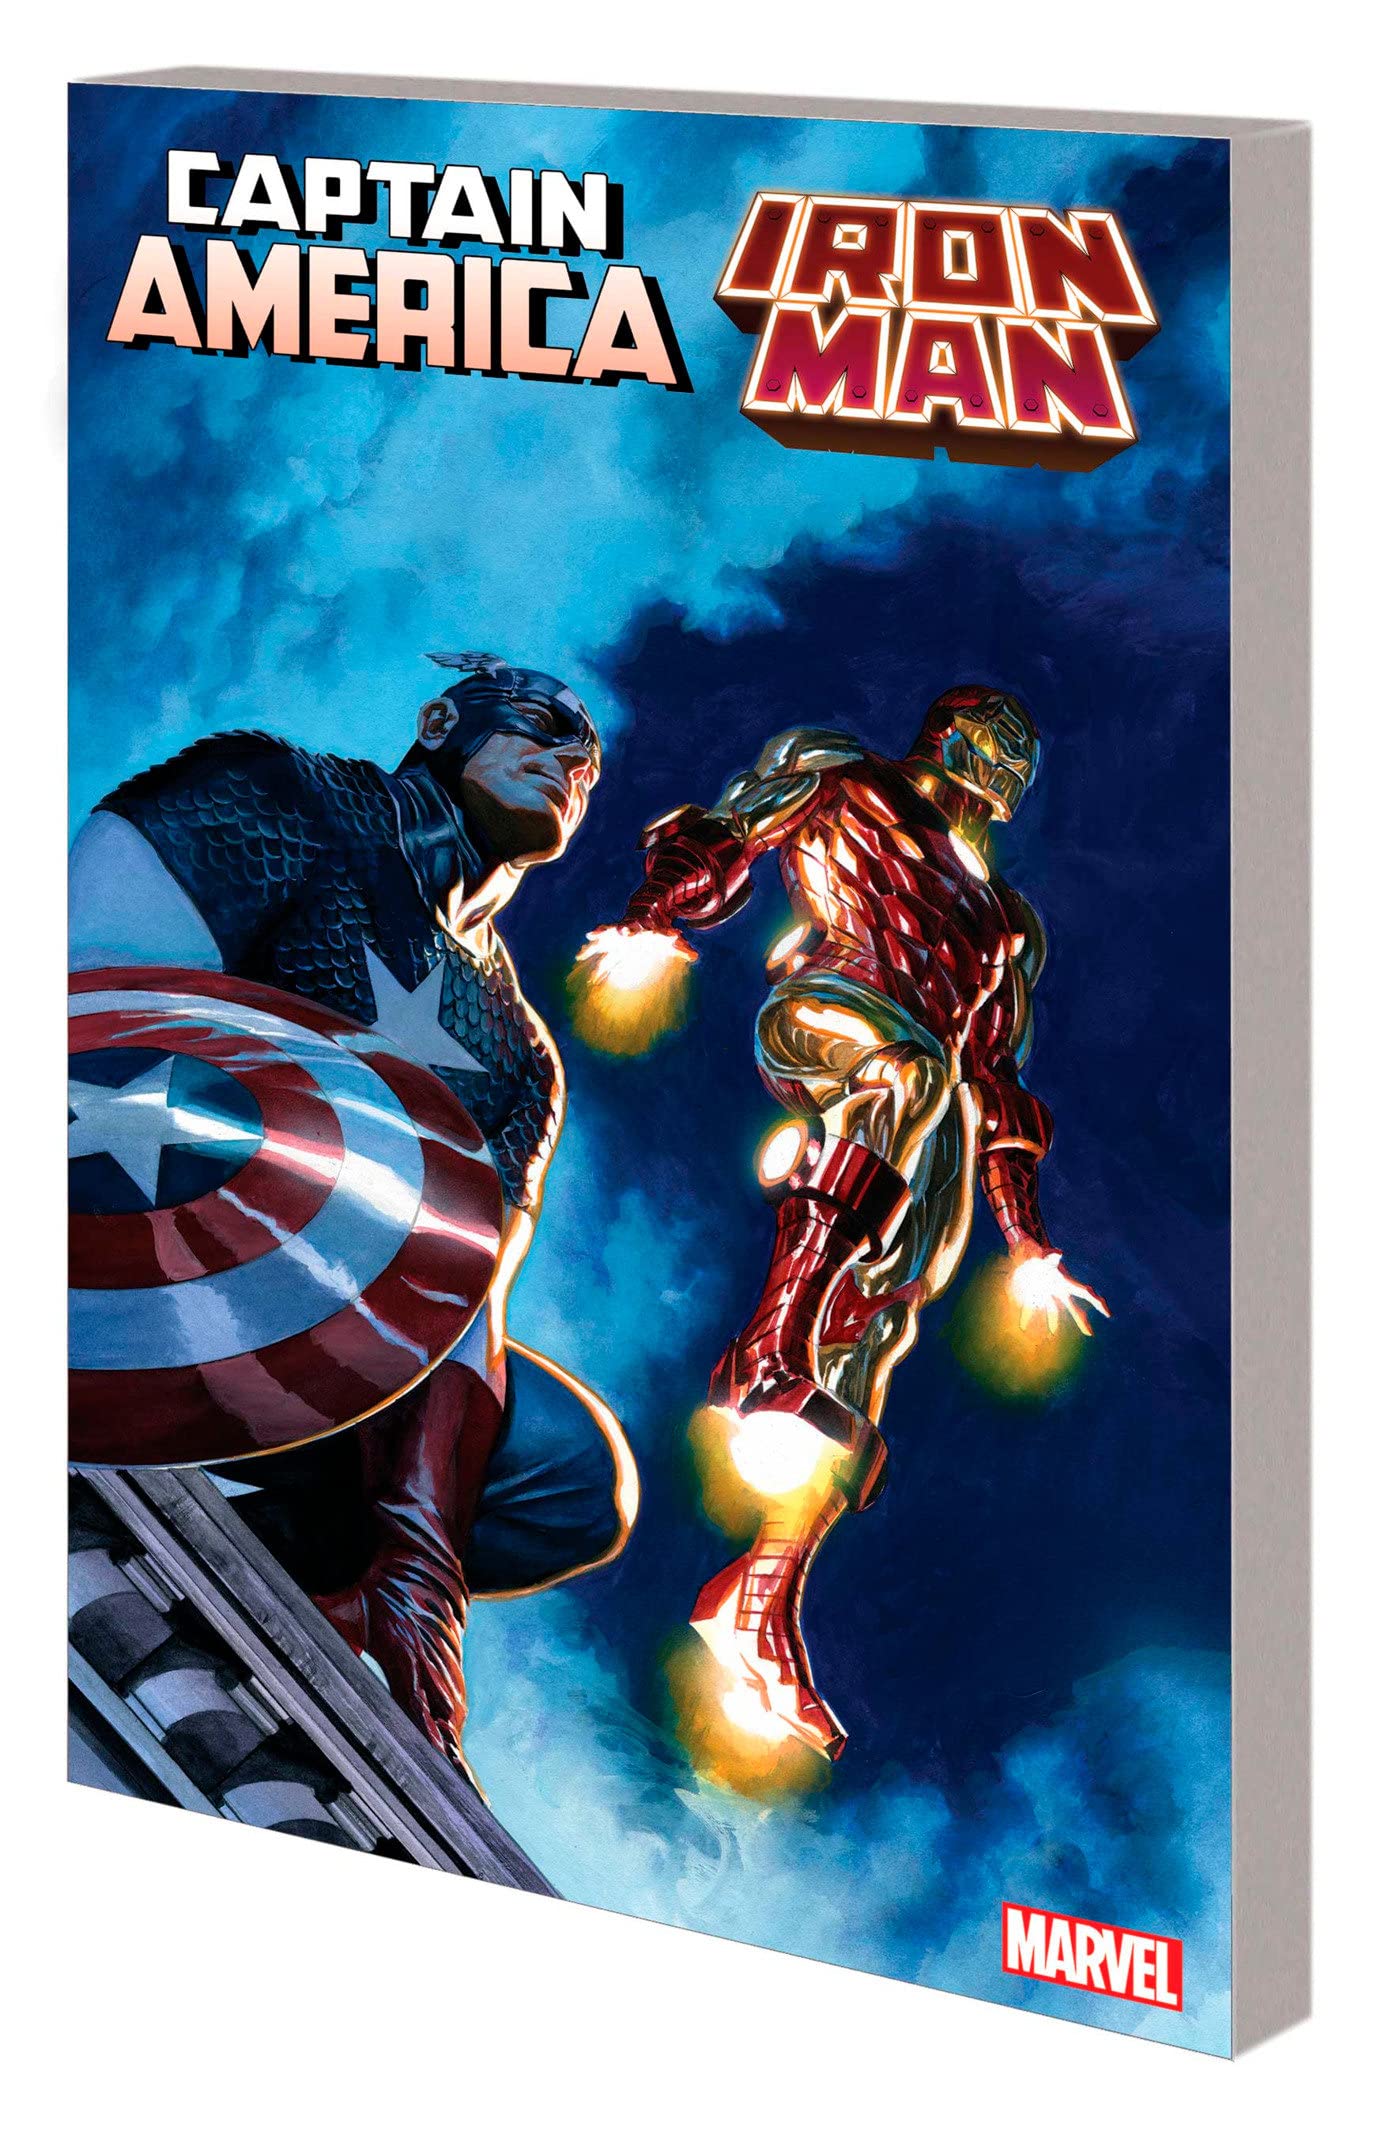 Captain America / Iron Man: The Armor & The Shield - Complete 5-Issue Miniseries (Paperback Graphic Novel) - $9.39 @ Amazon